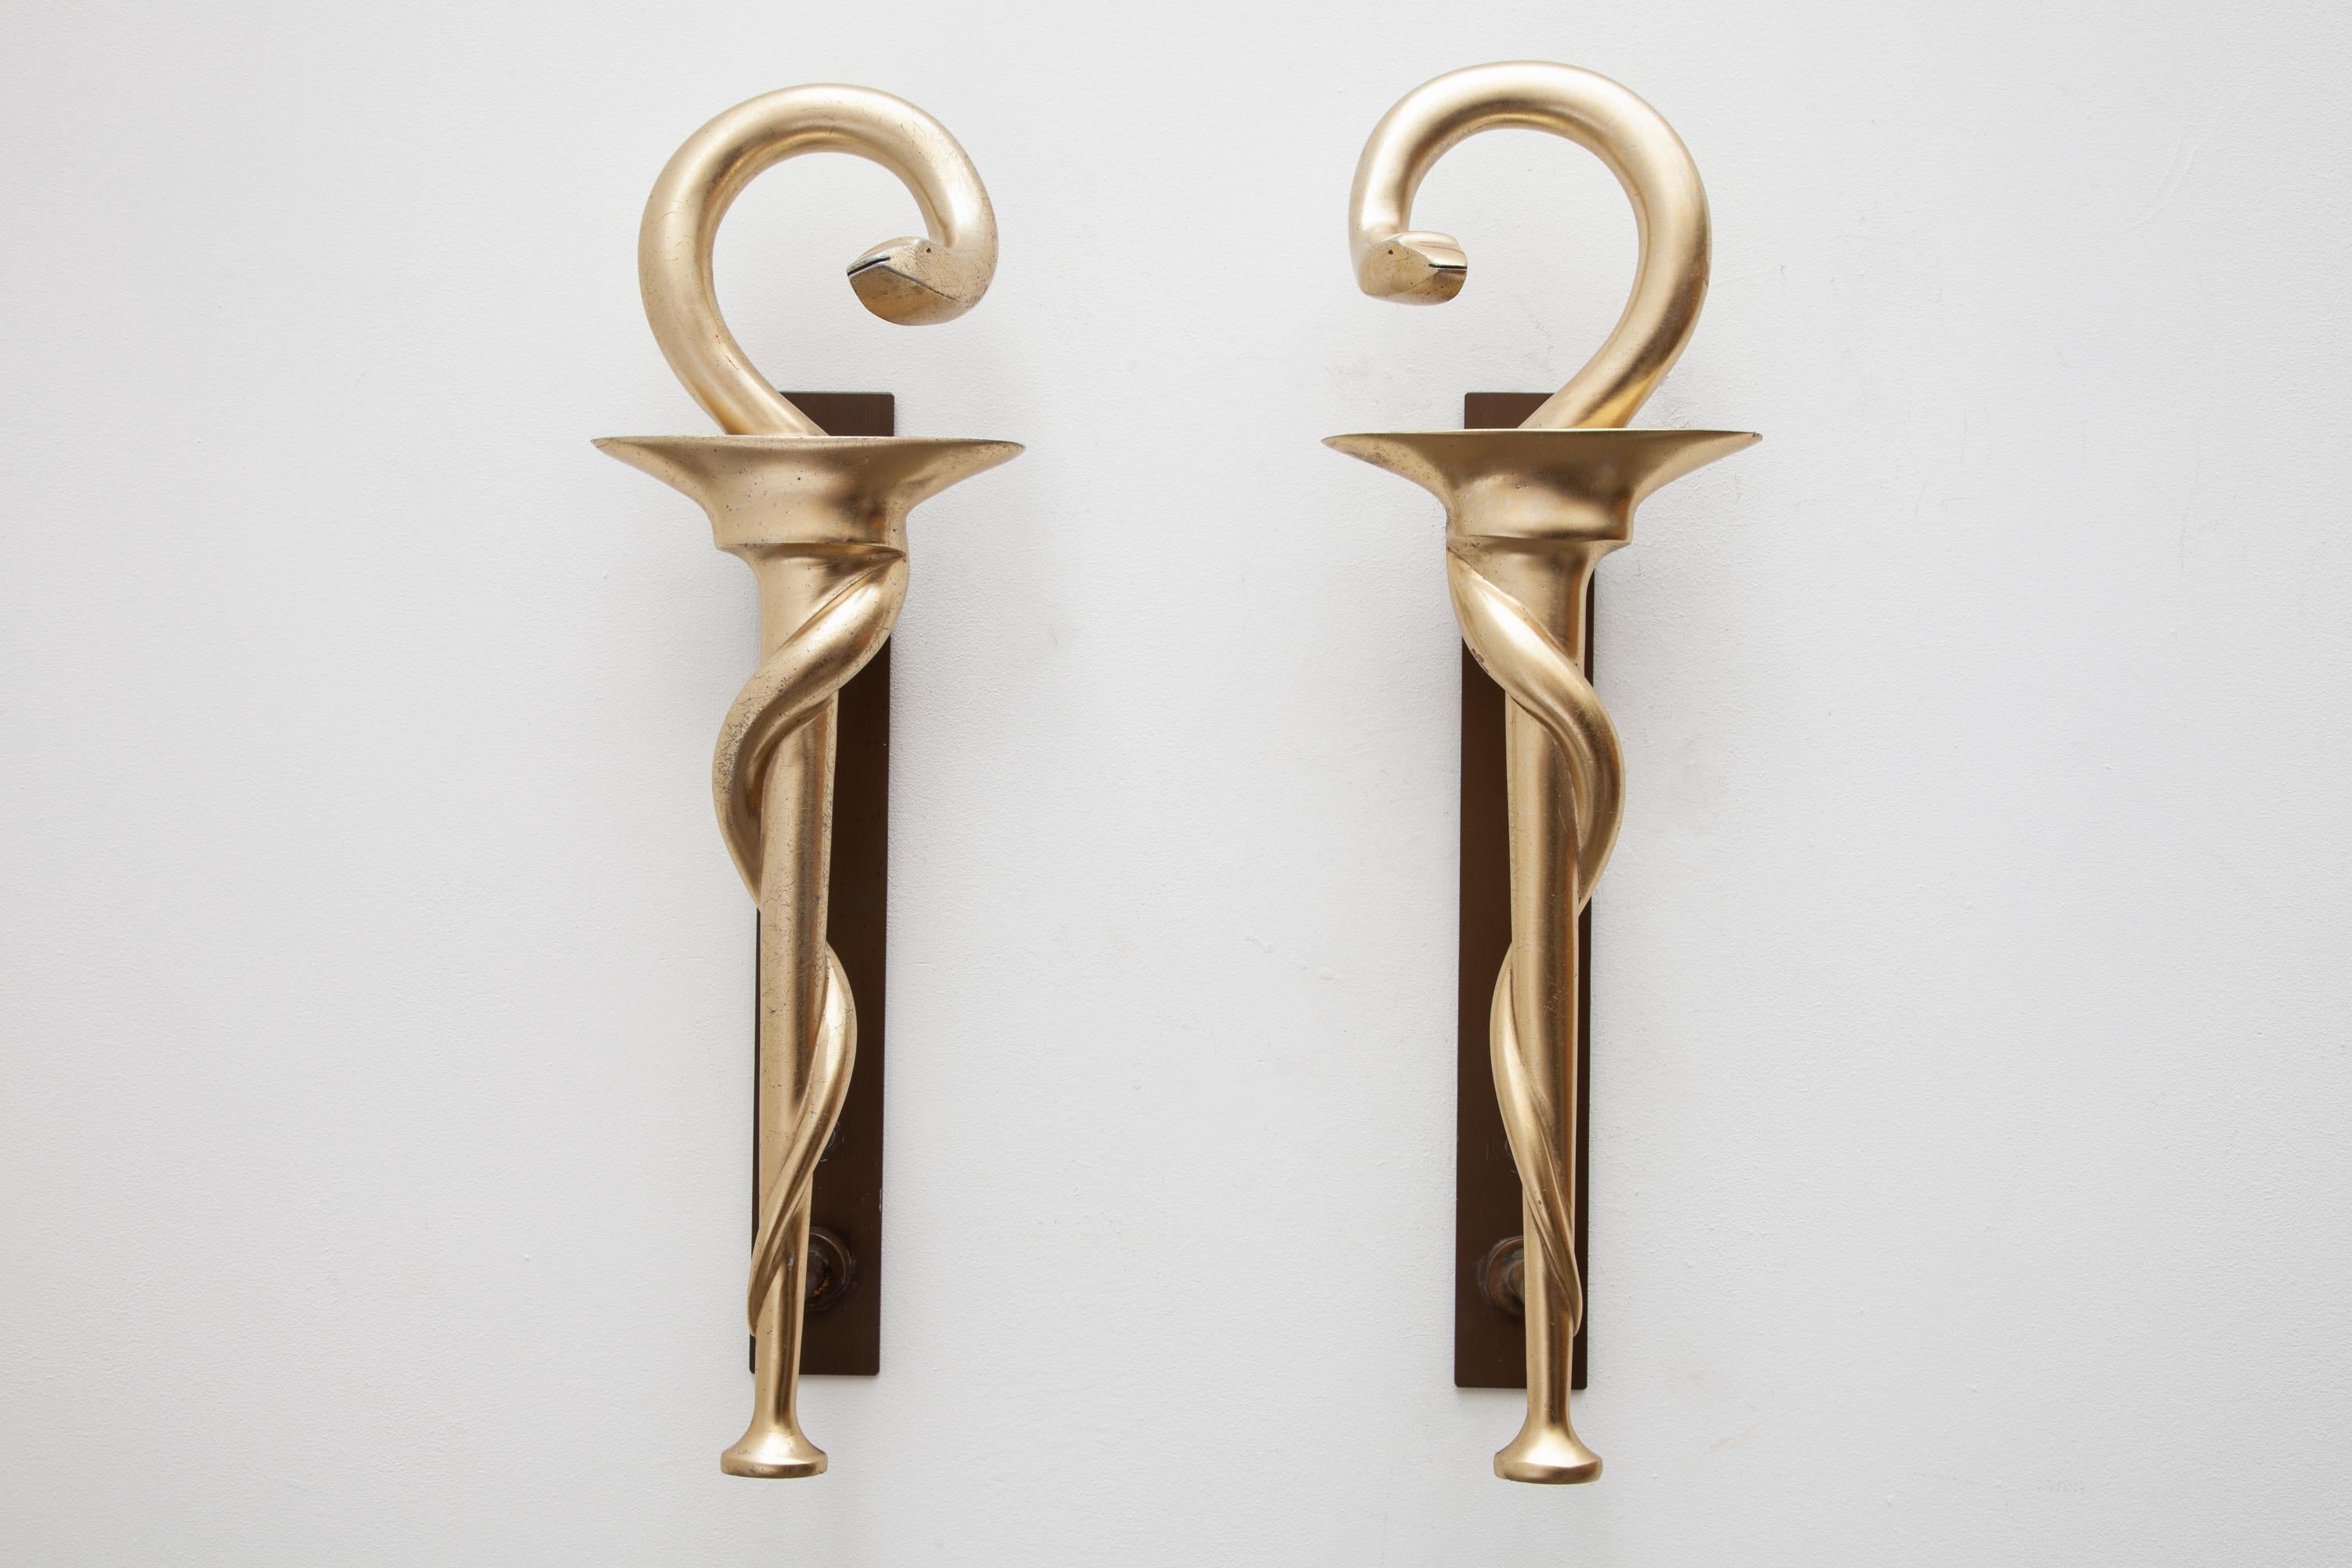 French Set of Two Pharmacy Icon with Caduceus Symbol Door Handles for Apothecary, 1970s